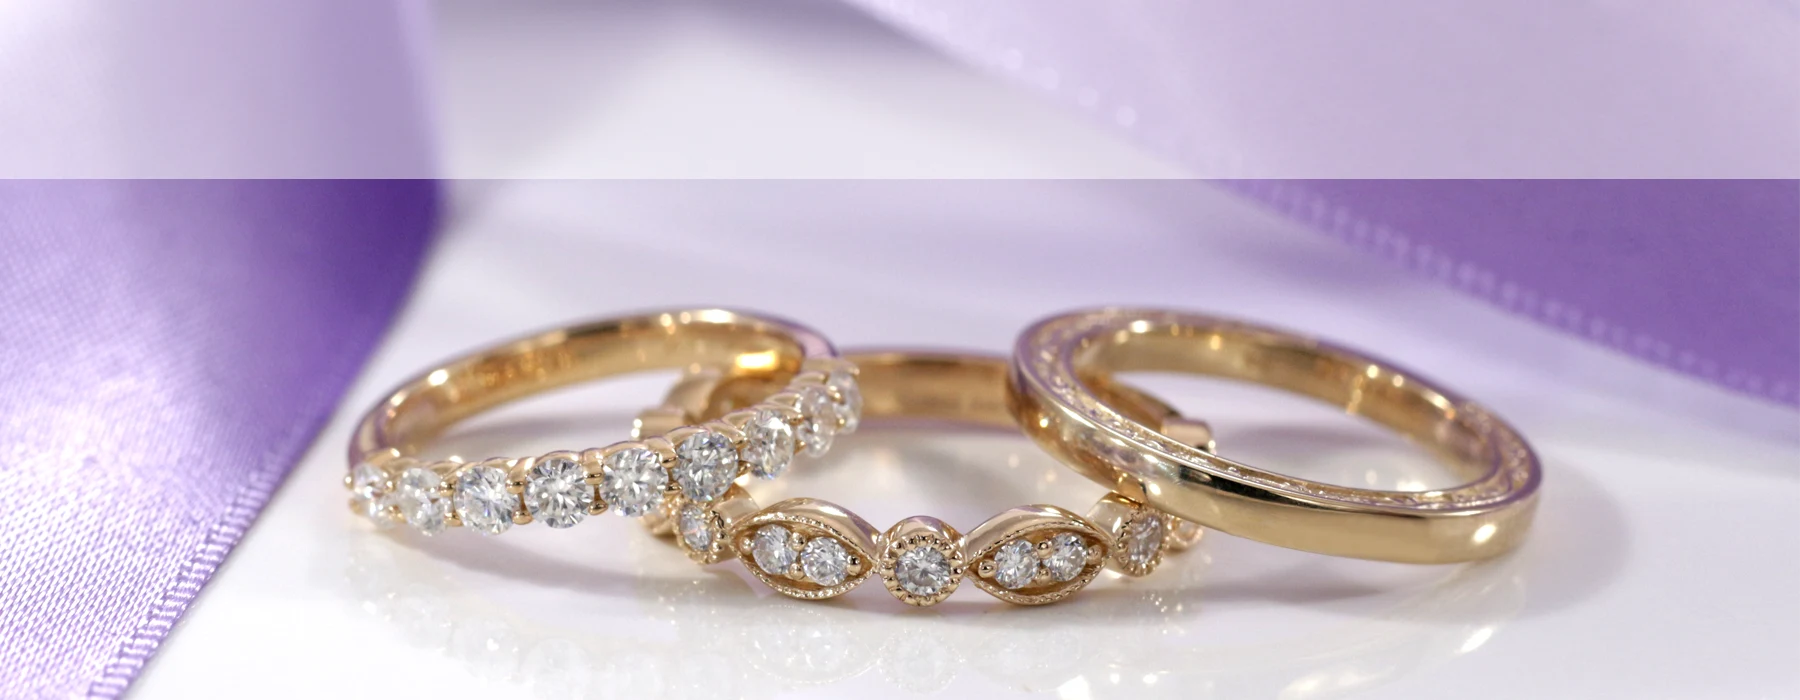 affordable gold and platinum diamond wedding and eternity bands at Quorri Canada